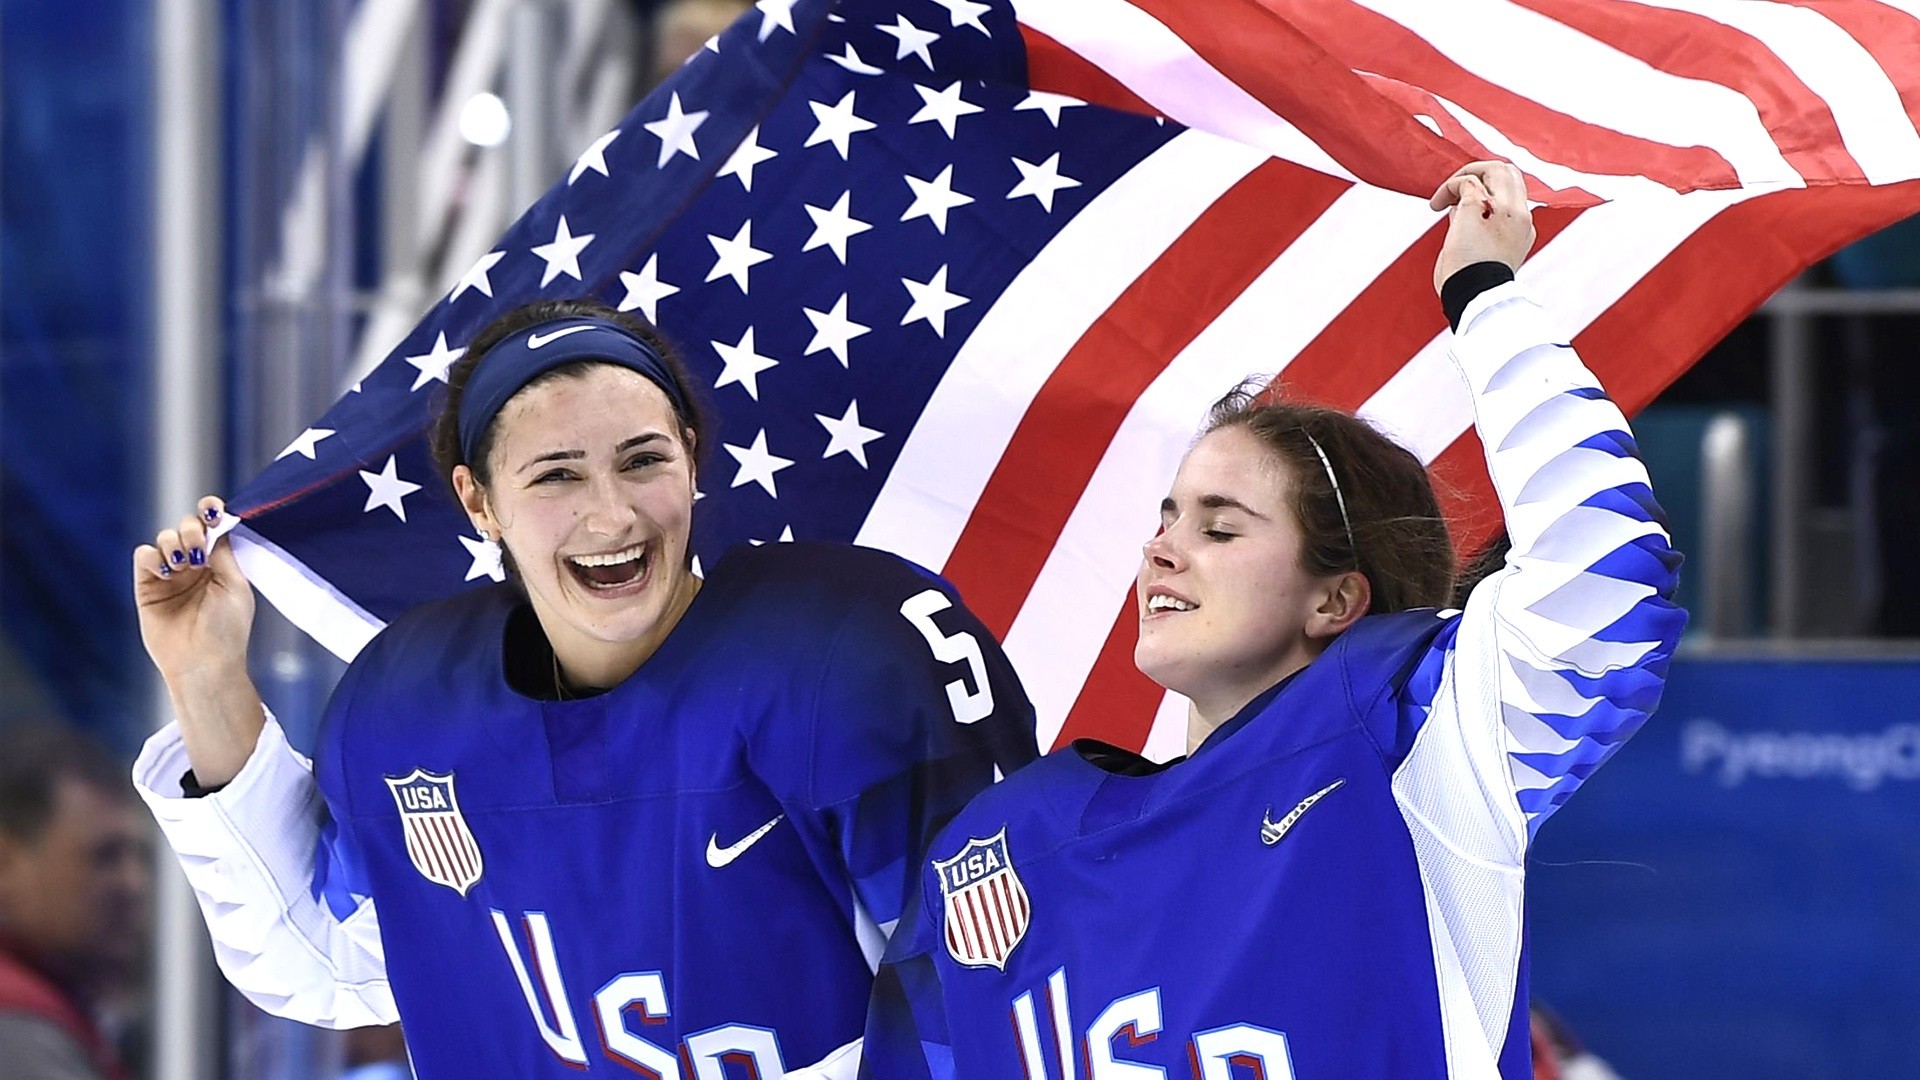 Is this the year U.S. womens hockey wins gold? - NBC Sports